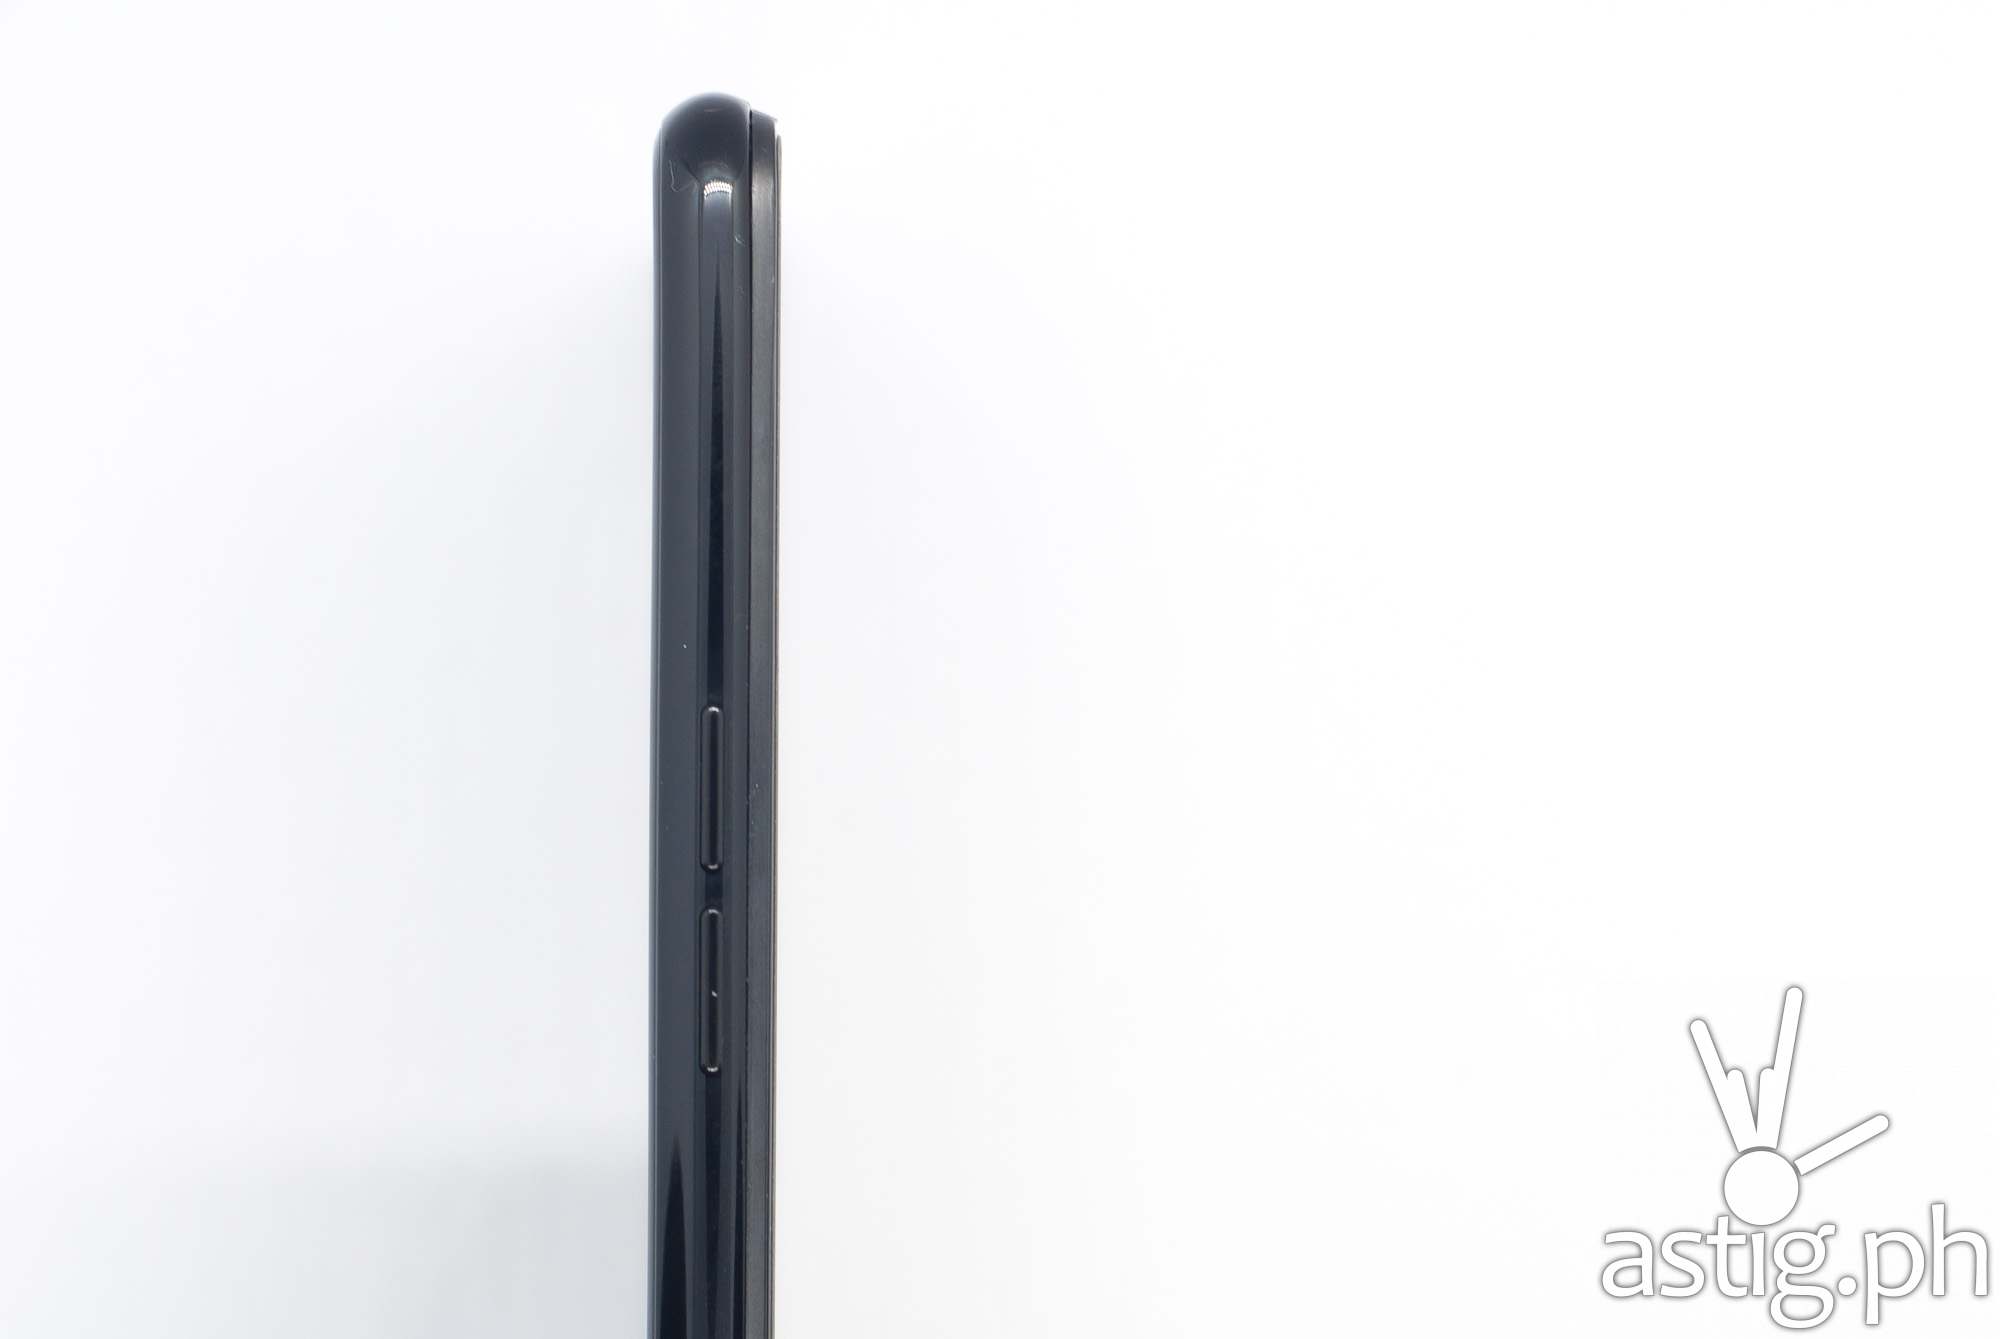 OPPO F7 Youth side showing raised screen indention